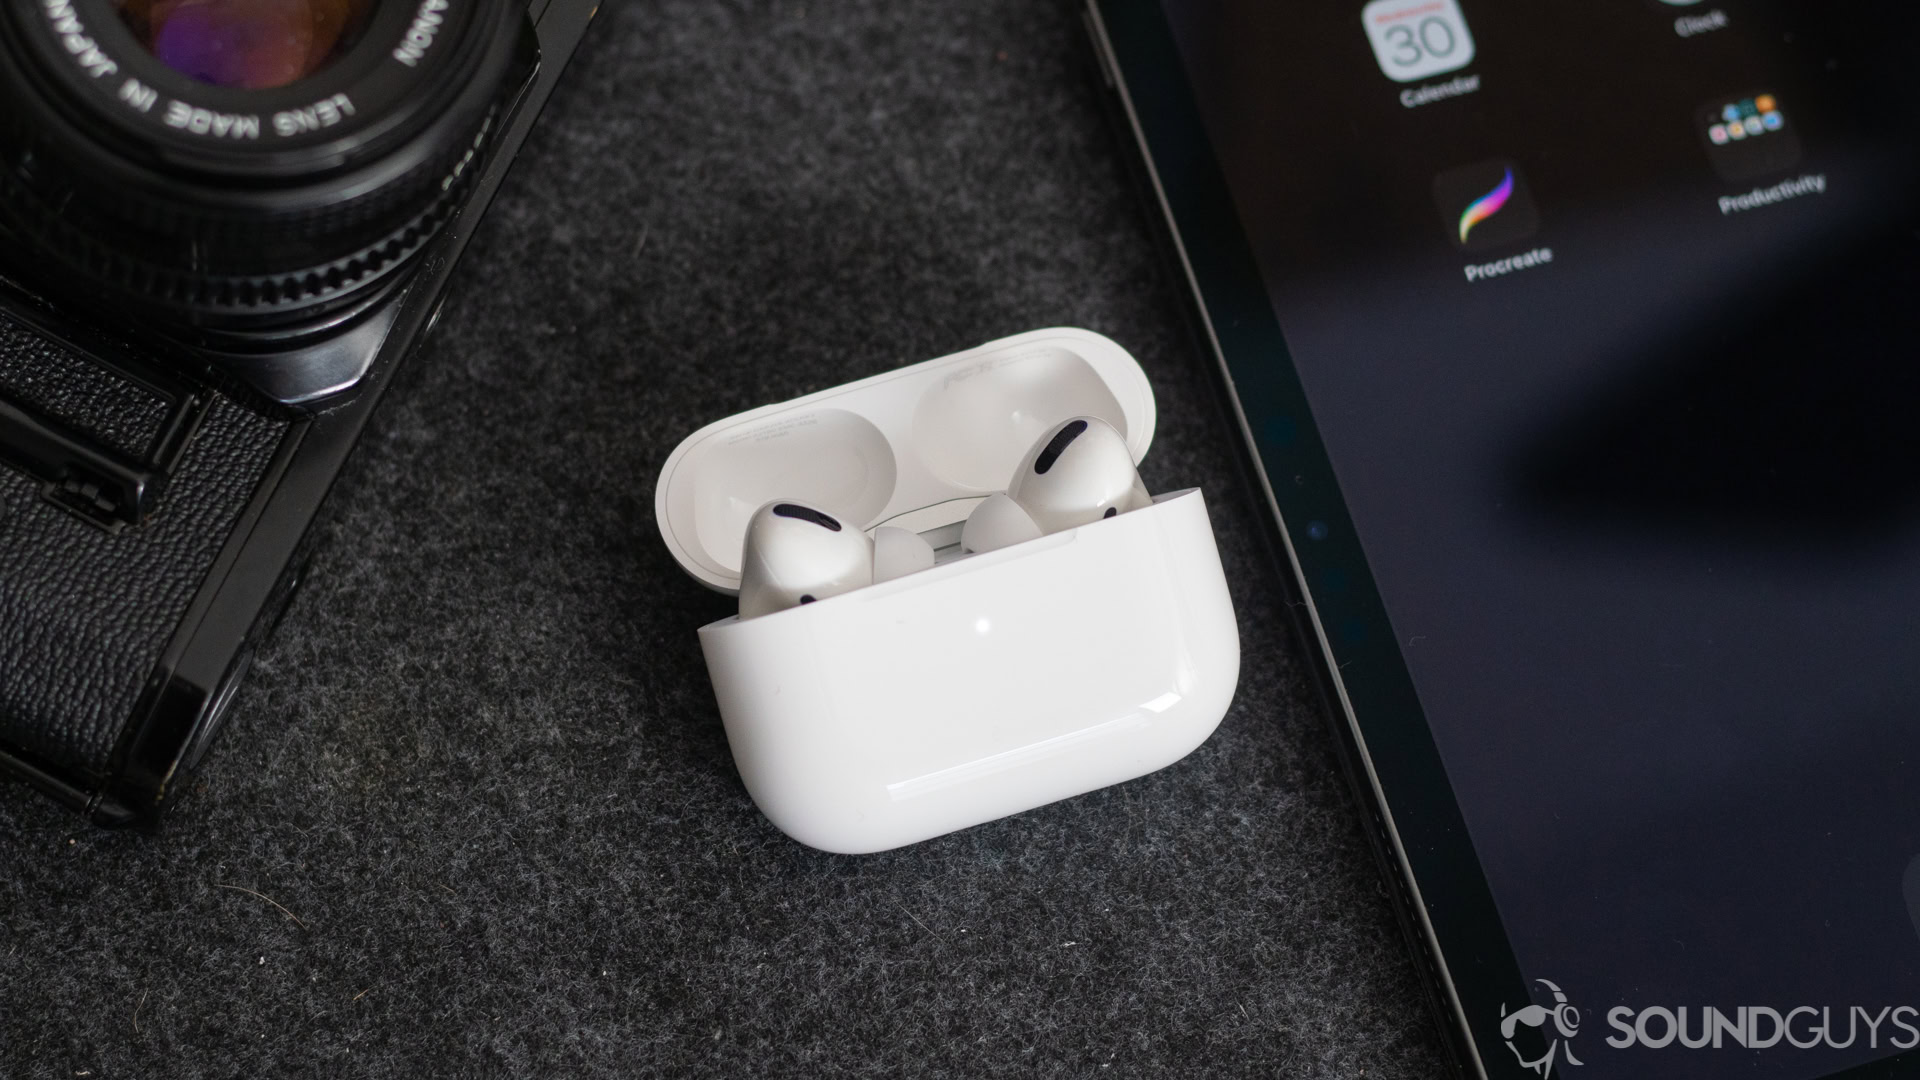 AirPods Pro earbud in wireless charging case next to iPhone and digital camera.